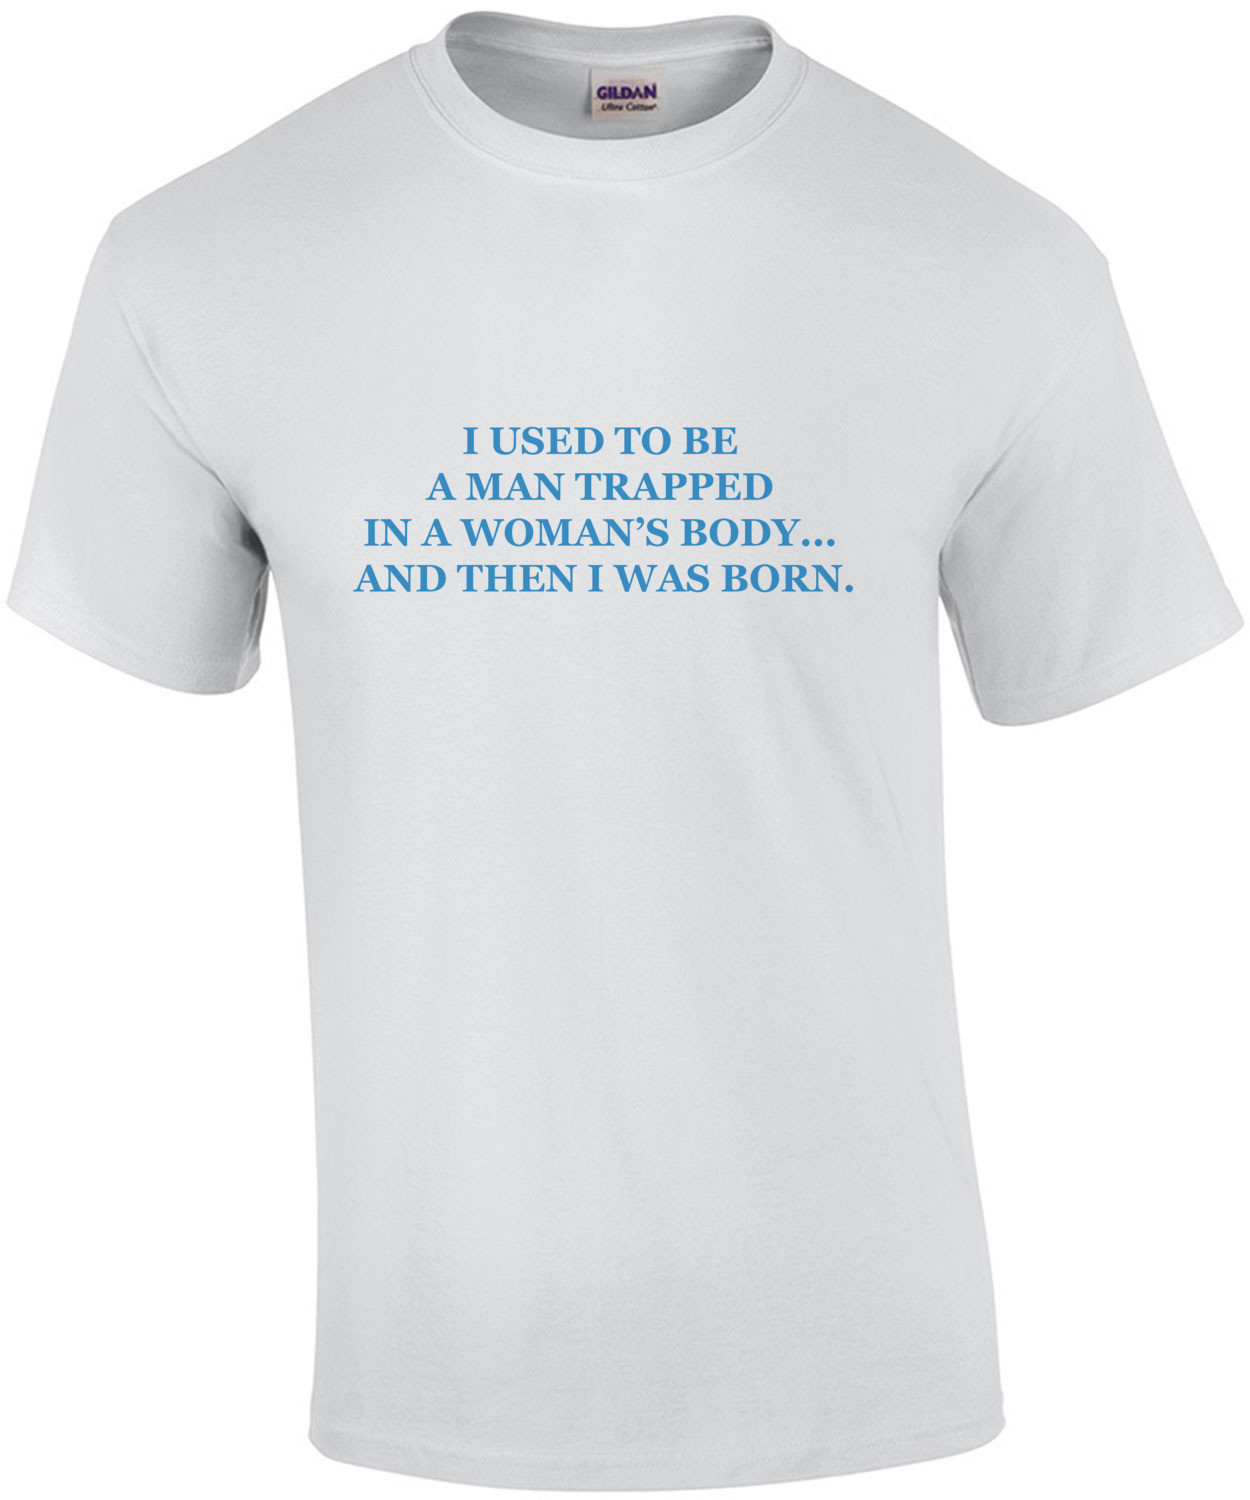 I used to be a man trapped in a womans body… and then I was born. T-Shirt